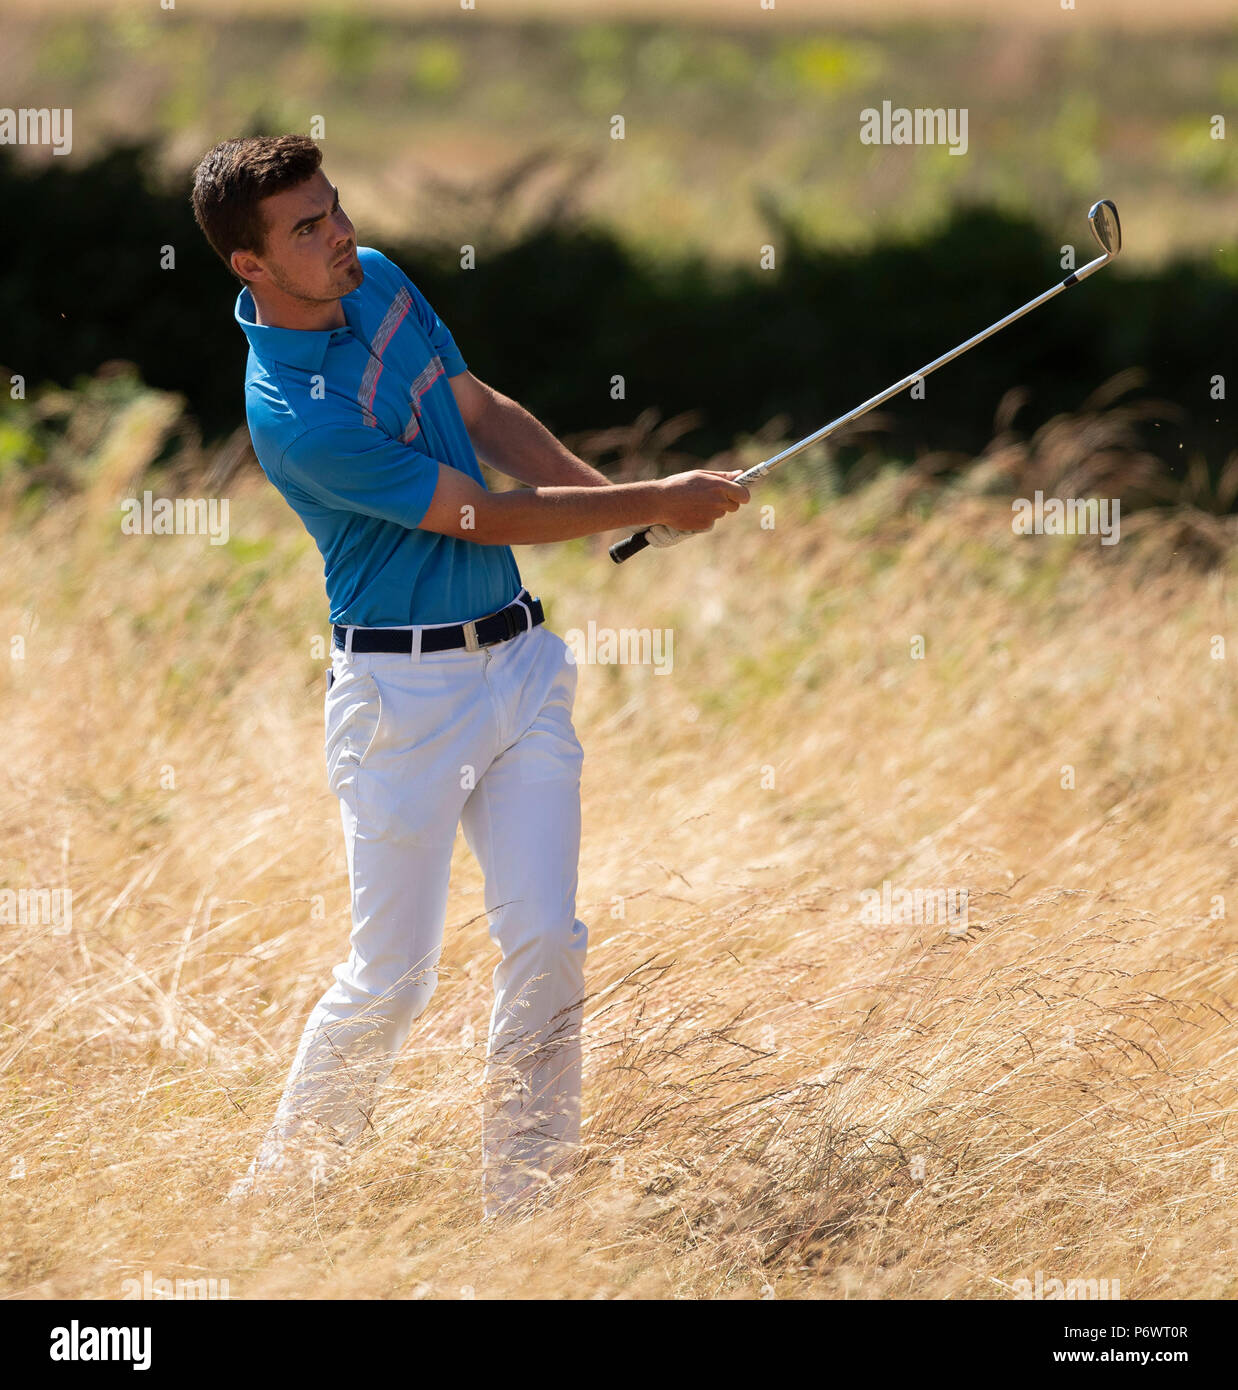 The Notts Golf Club, Nottinghamshire, UK. 3rd July 2018, Open Qualifier, The Notts Golf Club, David Hague of Malton and Norton plays from the rough to the third green Credit: David Kissman/Alamy Live News Stock Photo